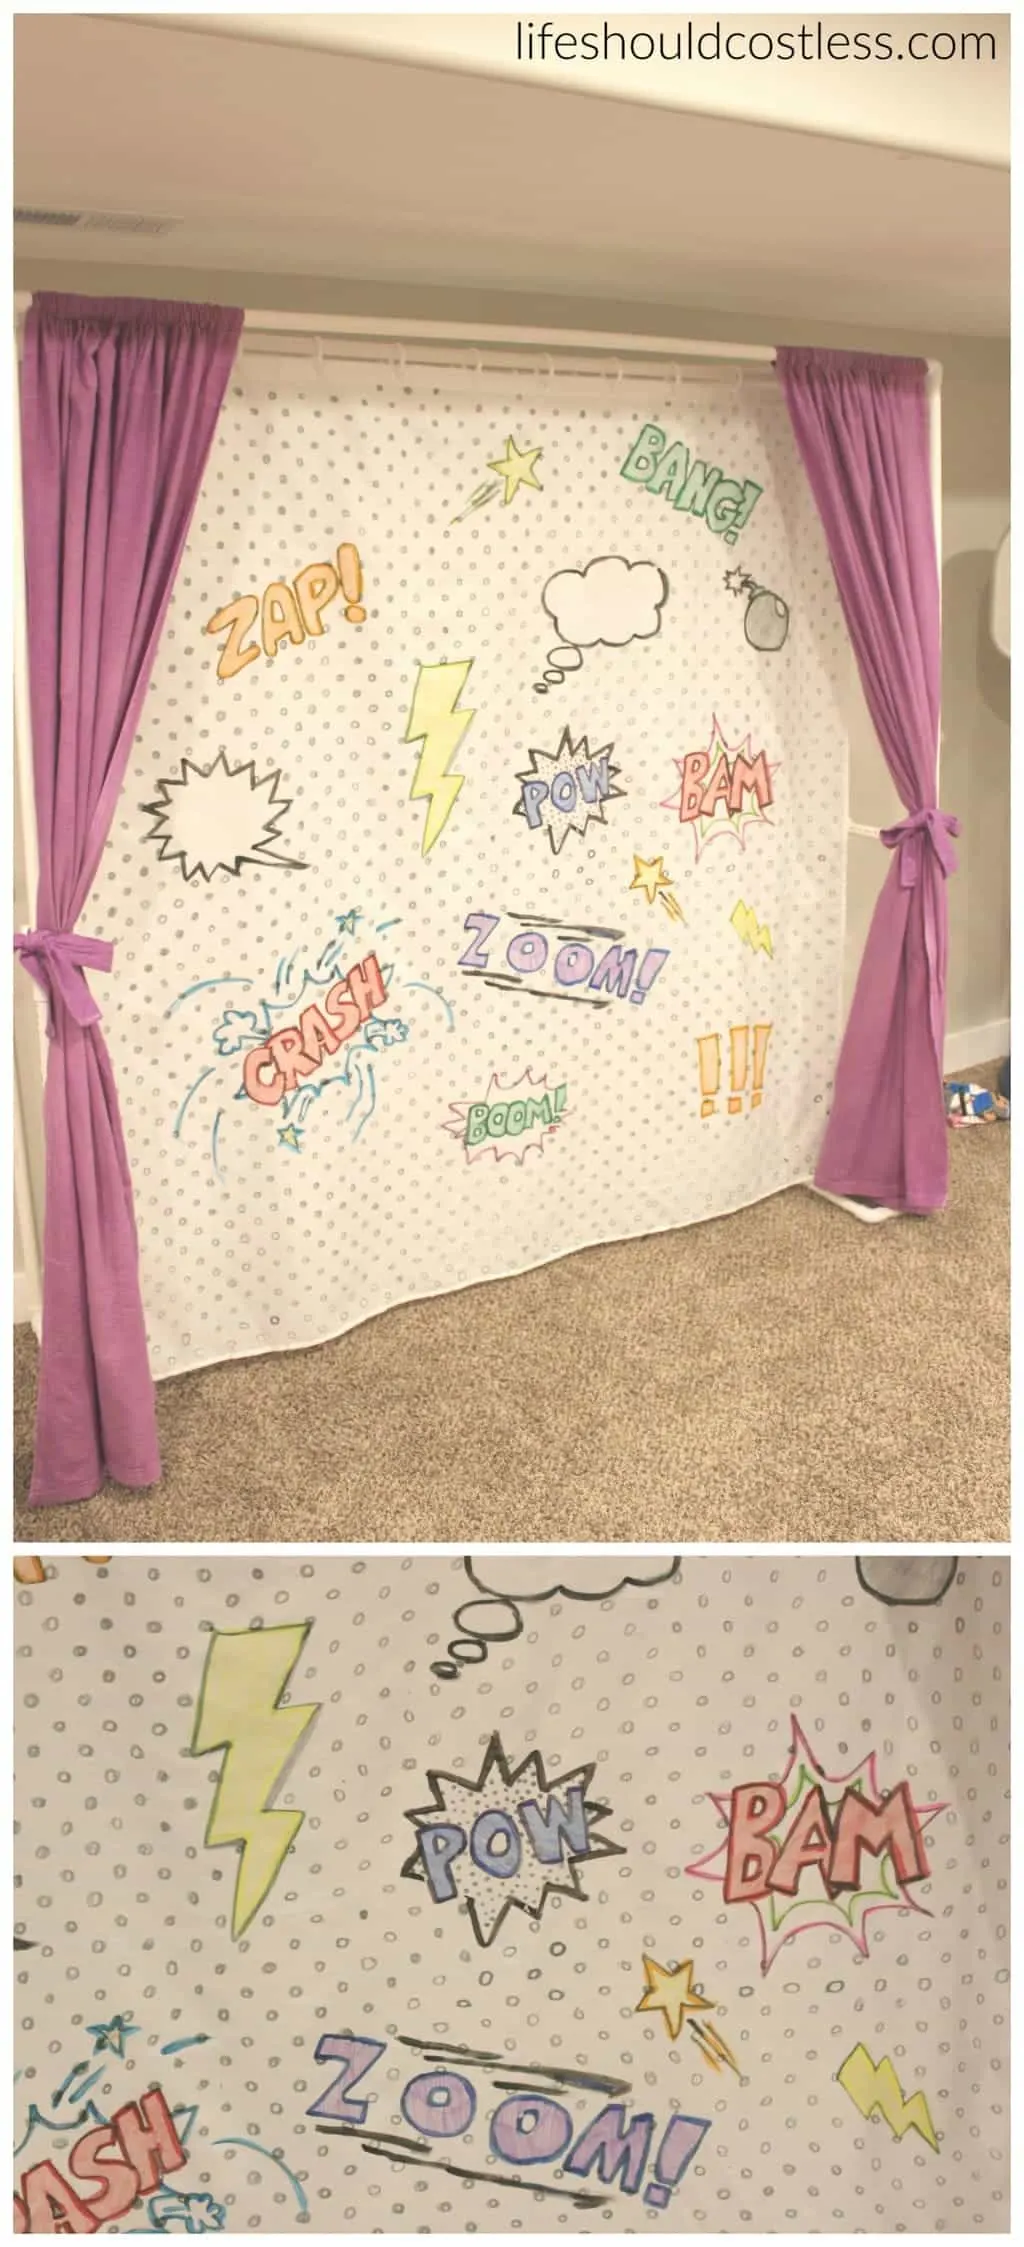 Multi-Use PVC Theater with washable and glow-in-the-dark backdrop options. The "thneed" of PVC theaters! It is so veratile that you can do almost anything. Best PVC project for kids. Used as backdrop for comic themed party.